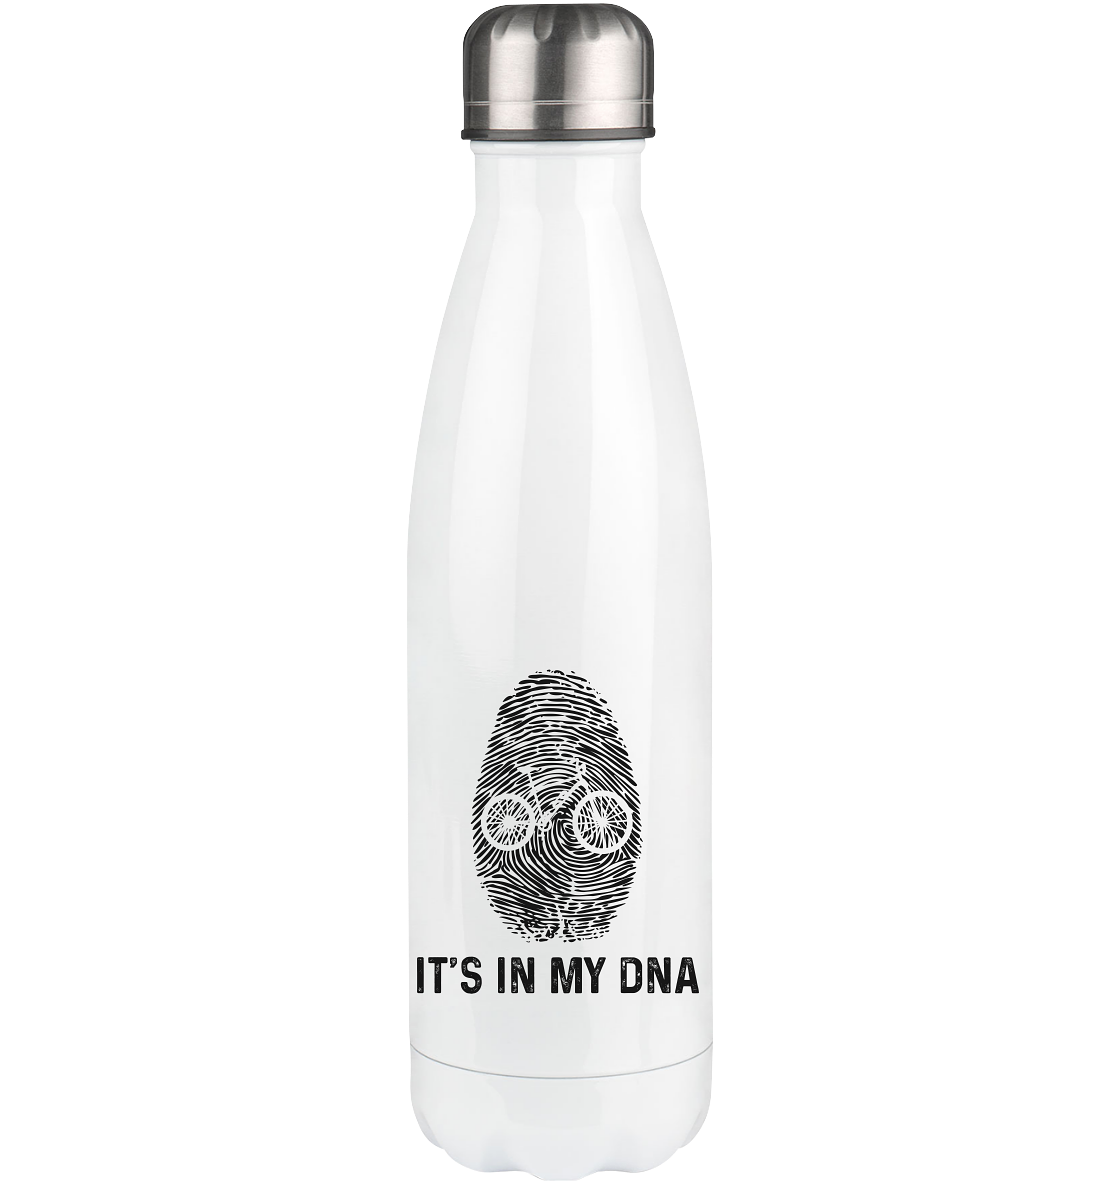 It's In My DNA - Edelstahl Thermosflasche e-bike 500ml